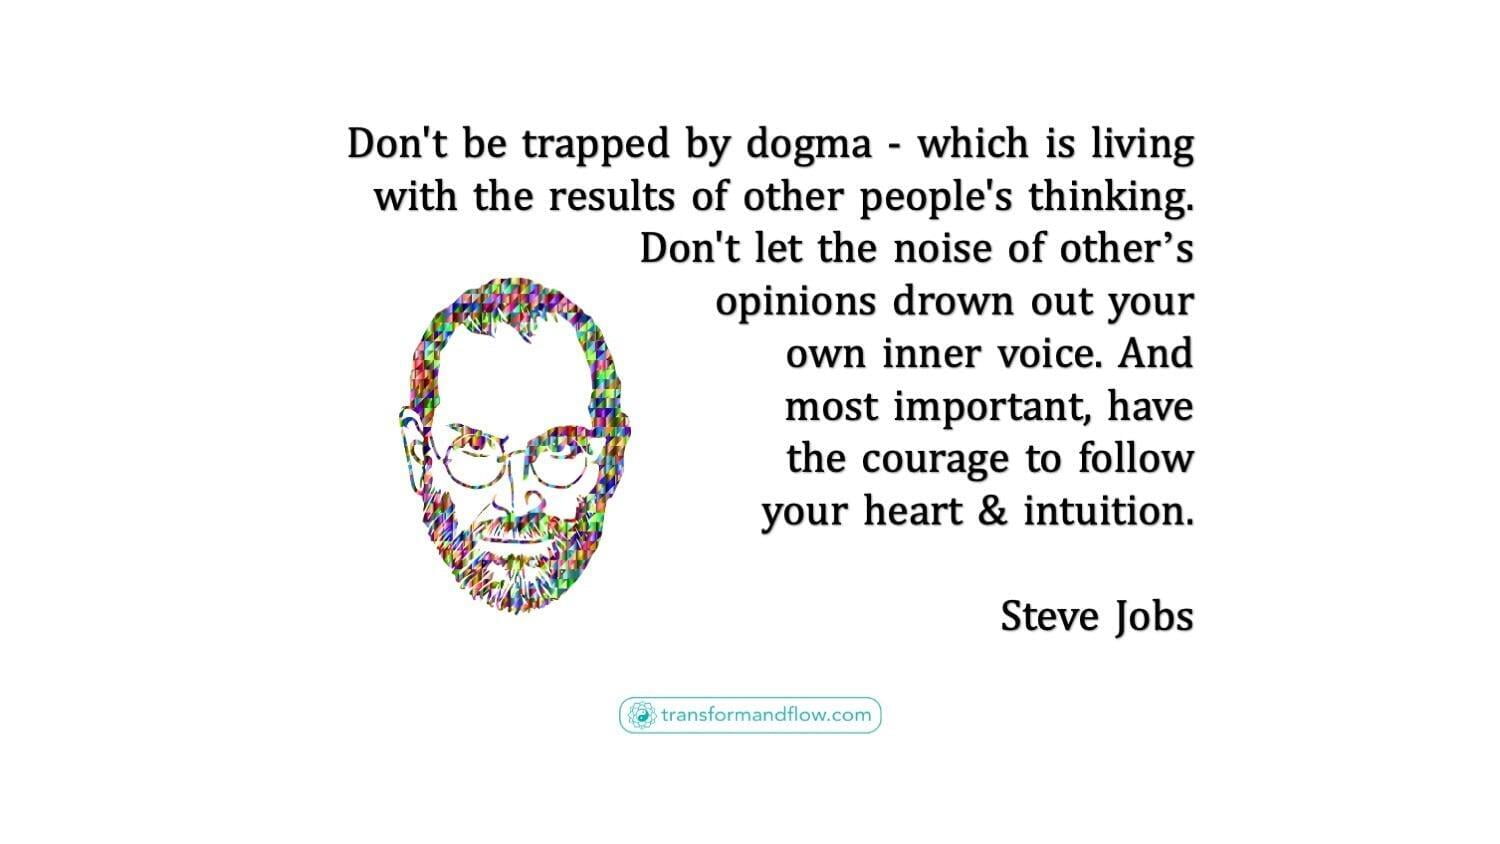 Don't Fall Into The Trap of Dogma